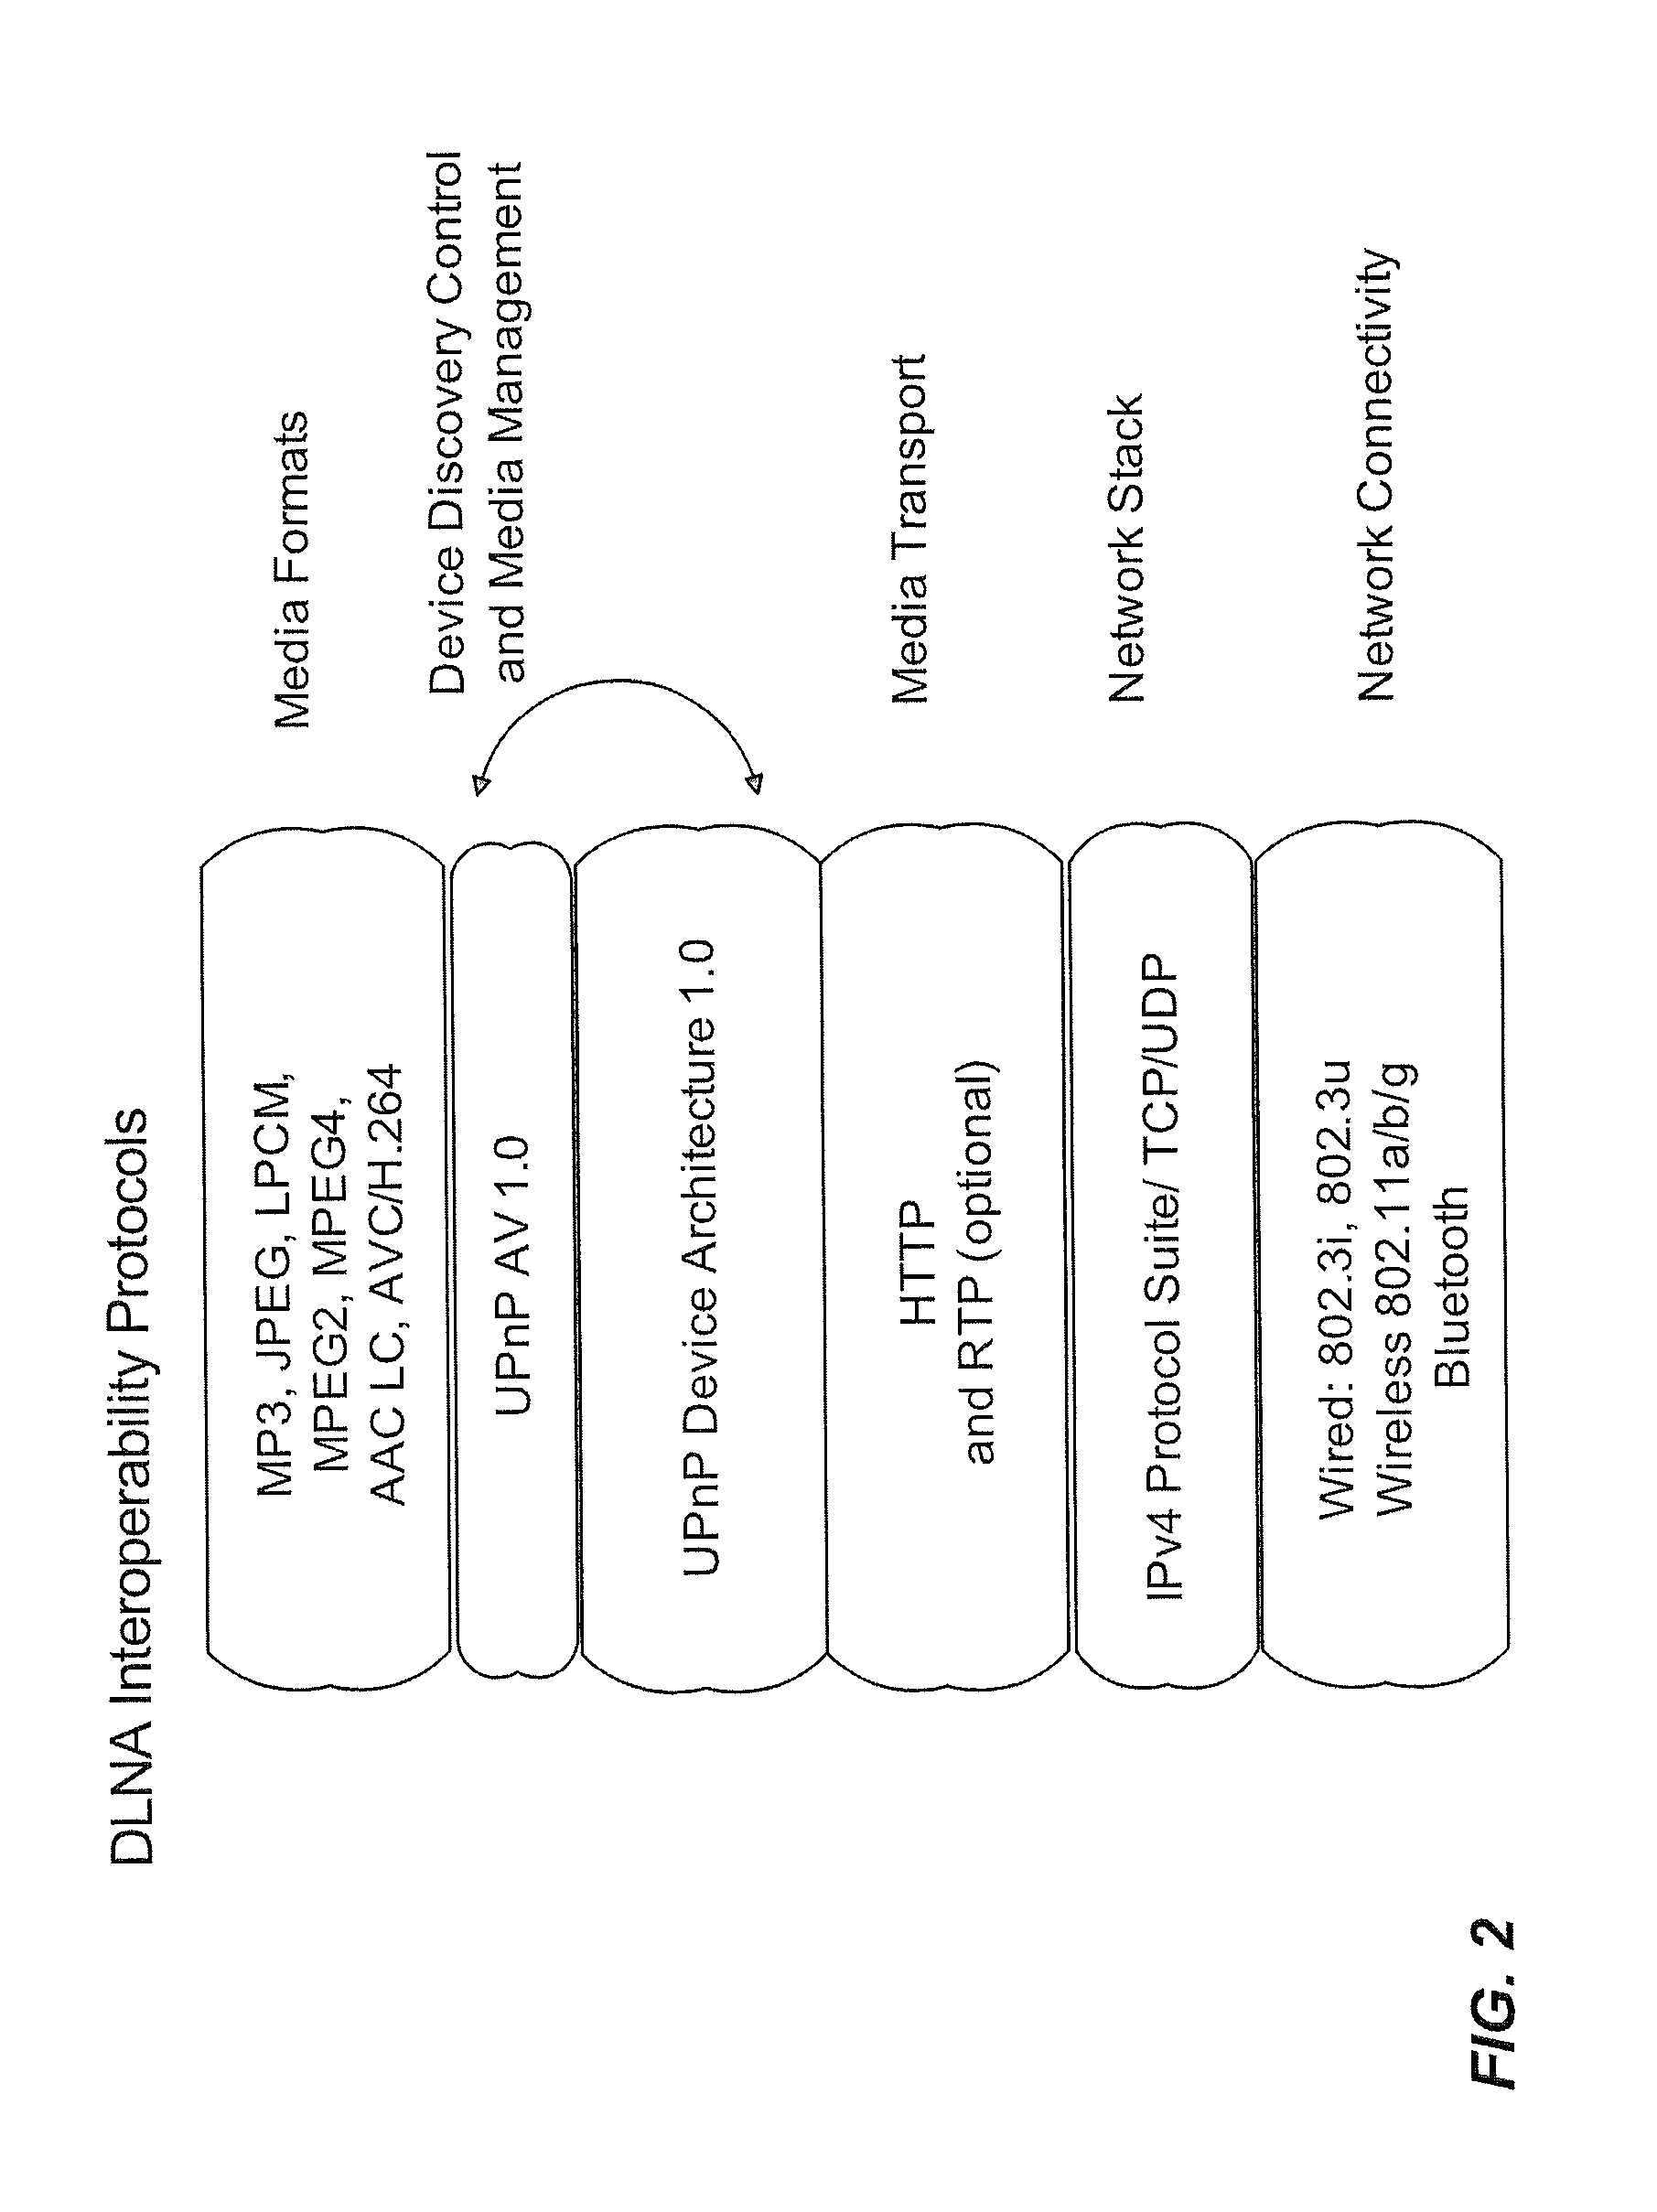 Streaming traffic classification method and apparatus